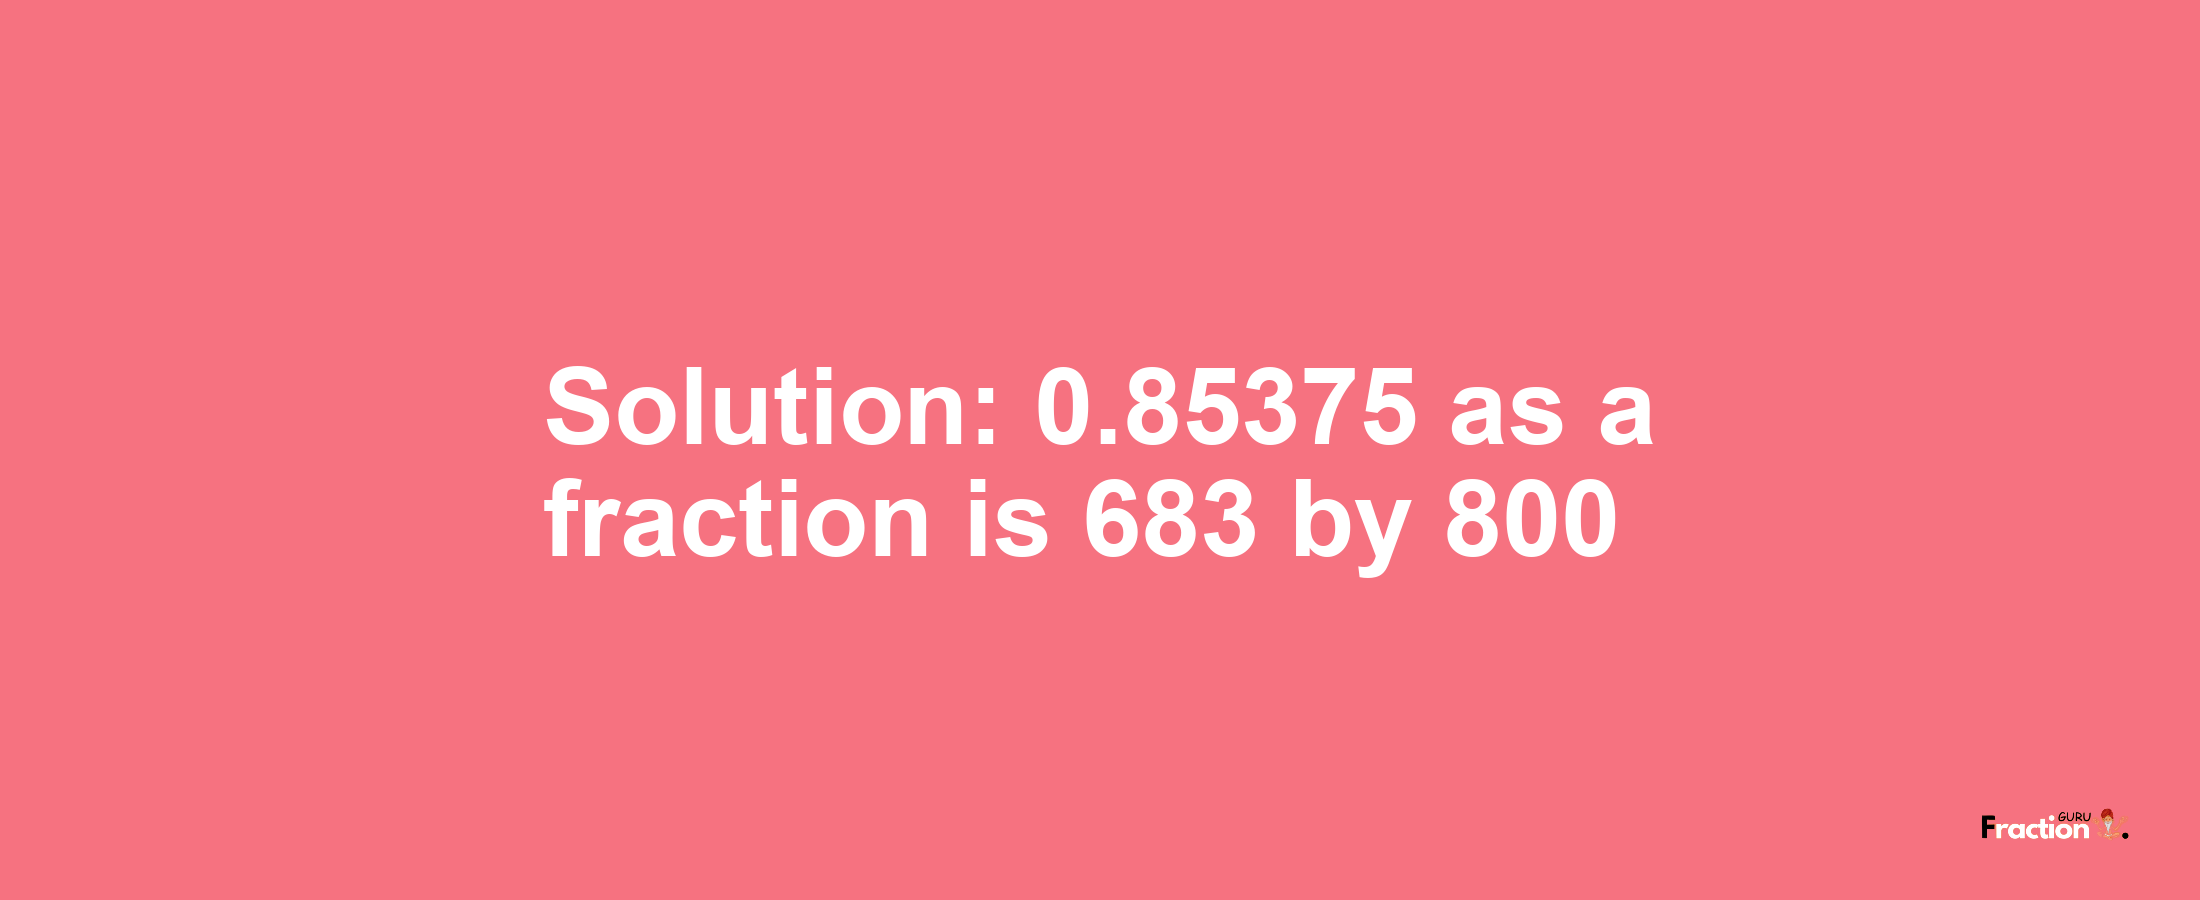 Solution:0.85375 as a fraction is 683/800